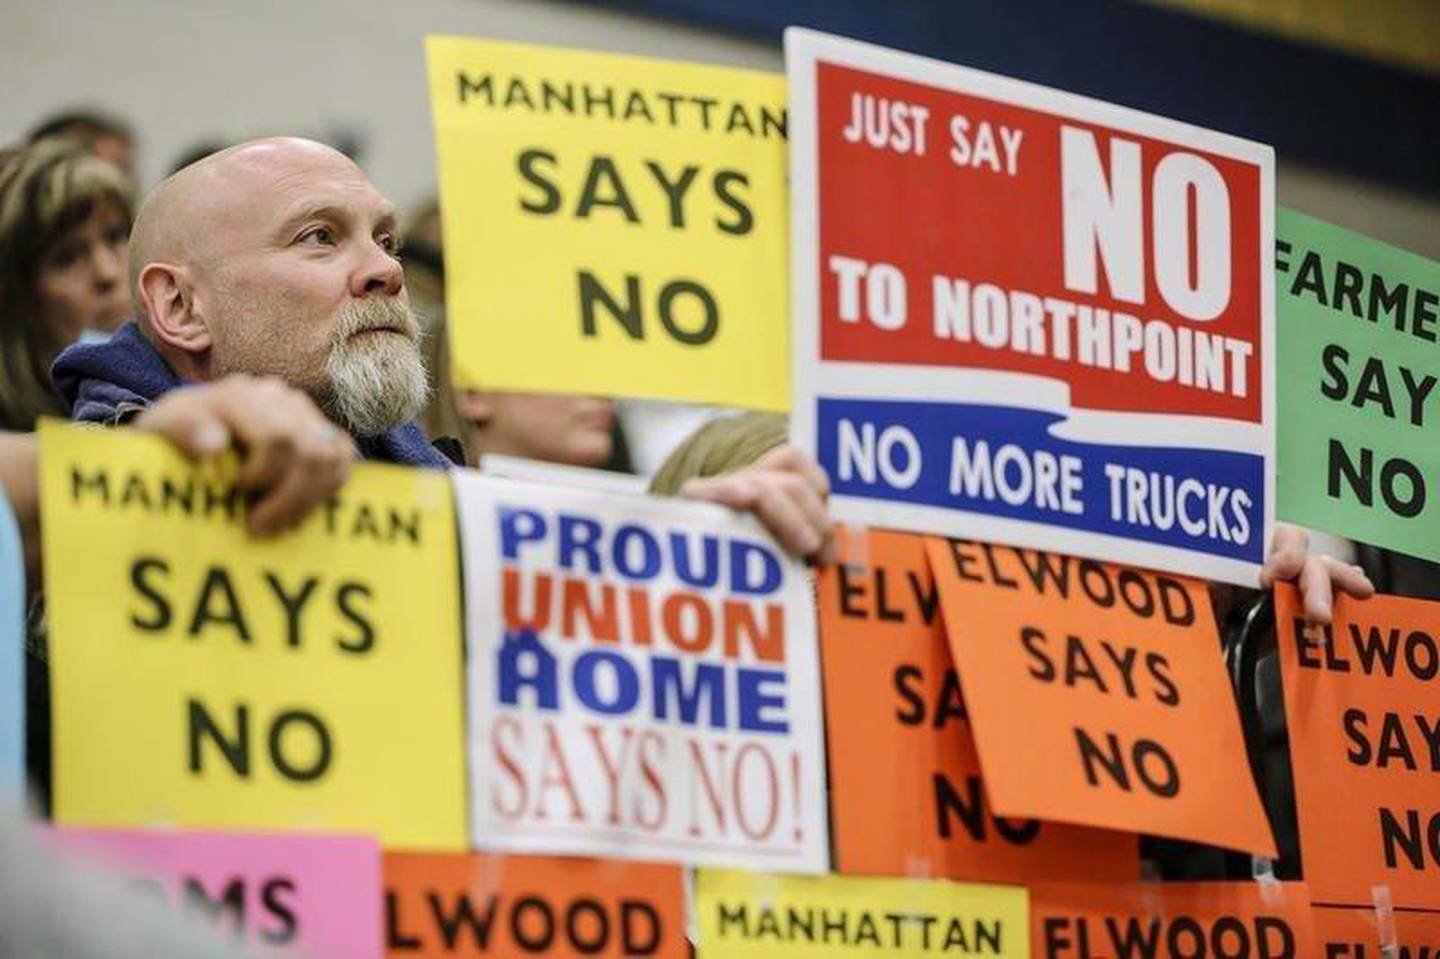 An Elwood public hearing on the NorthPoint plan was stretched out over three meetings because of the intense opposition and public comment on the project.